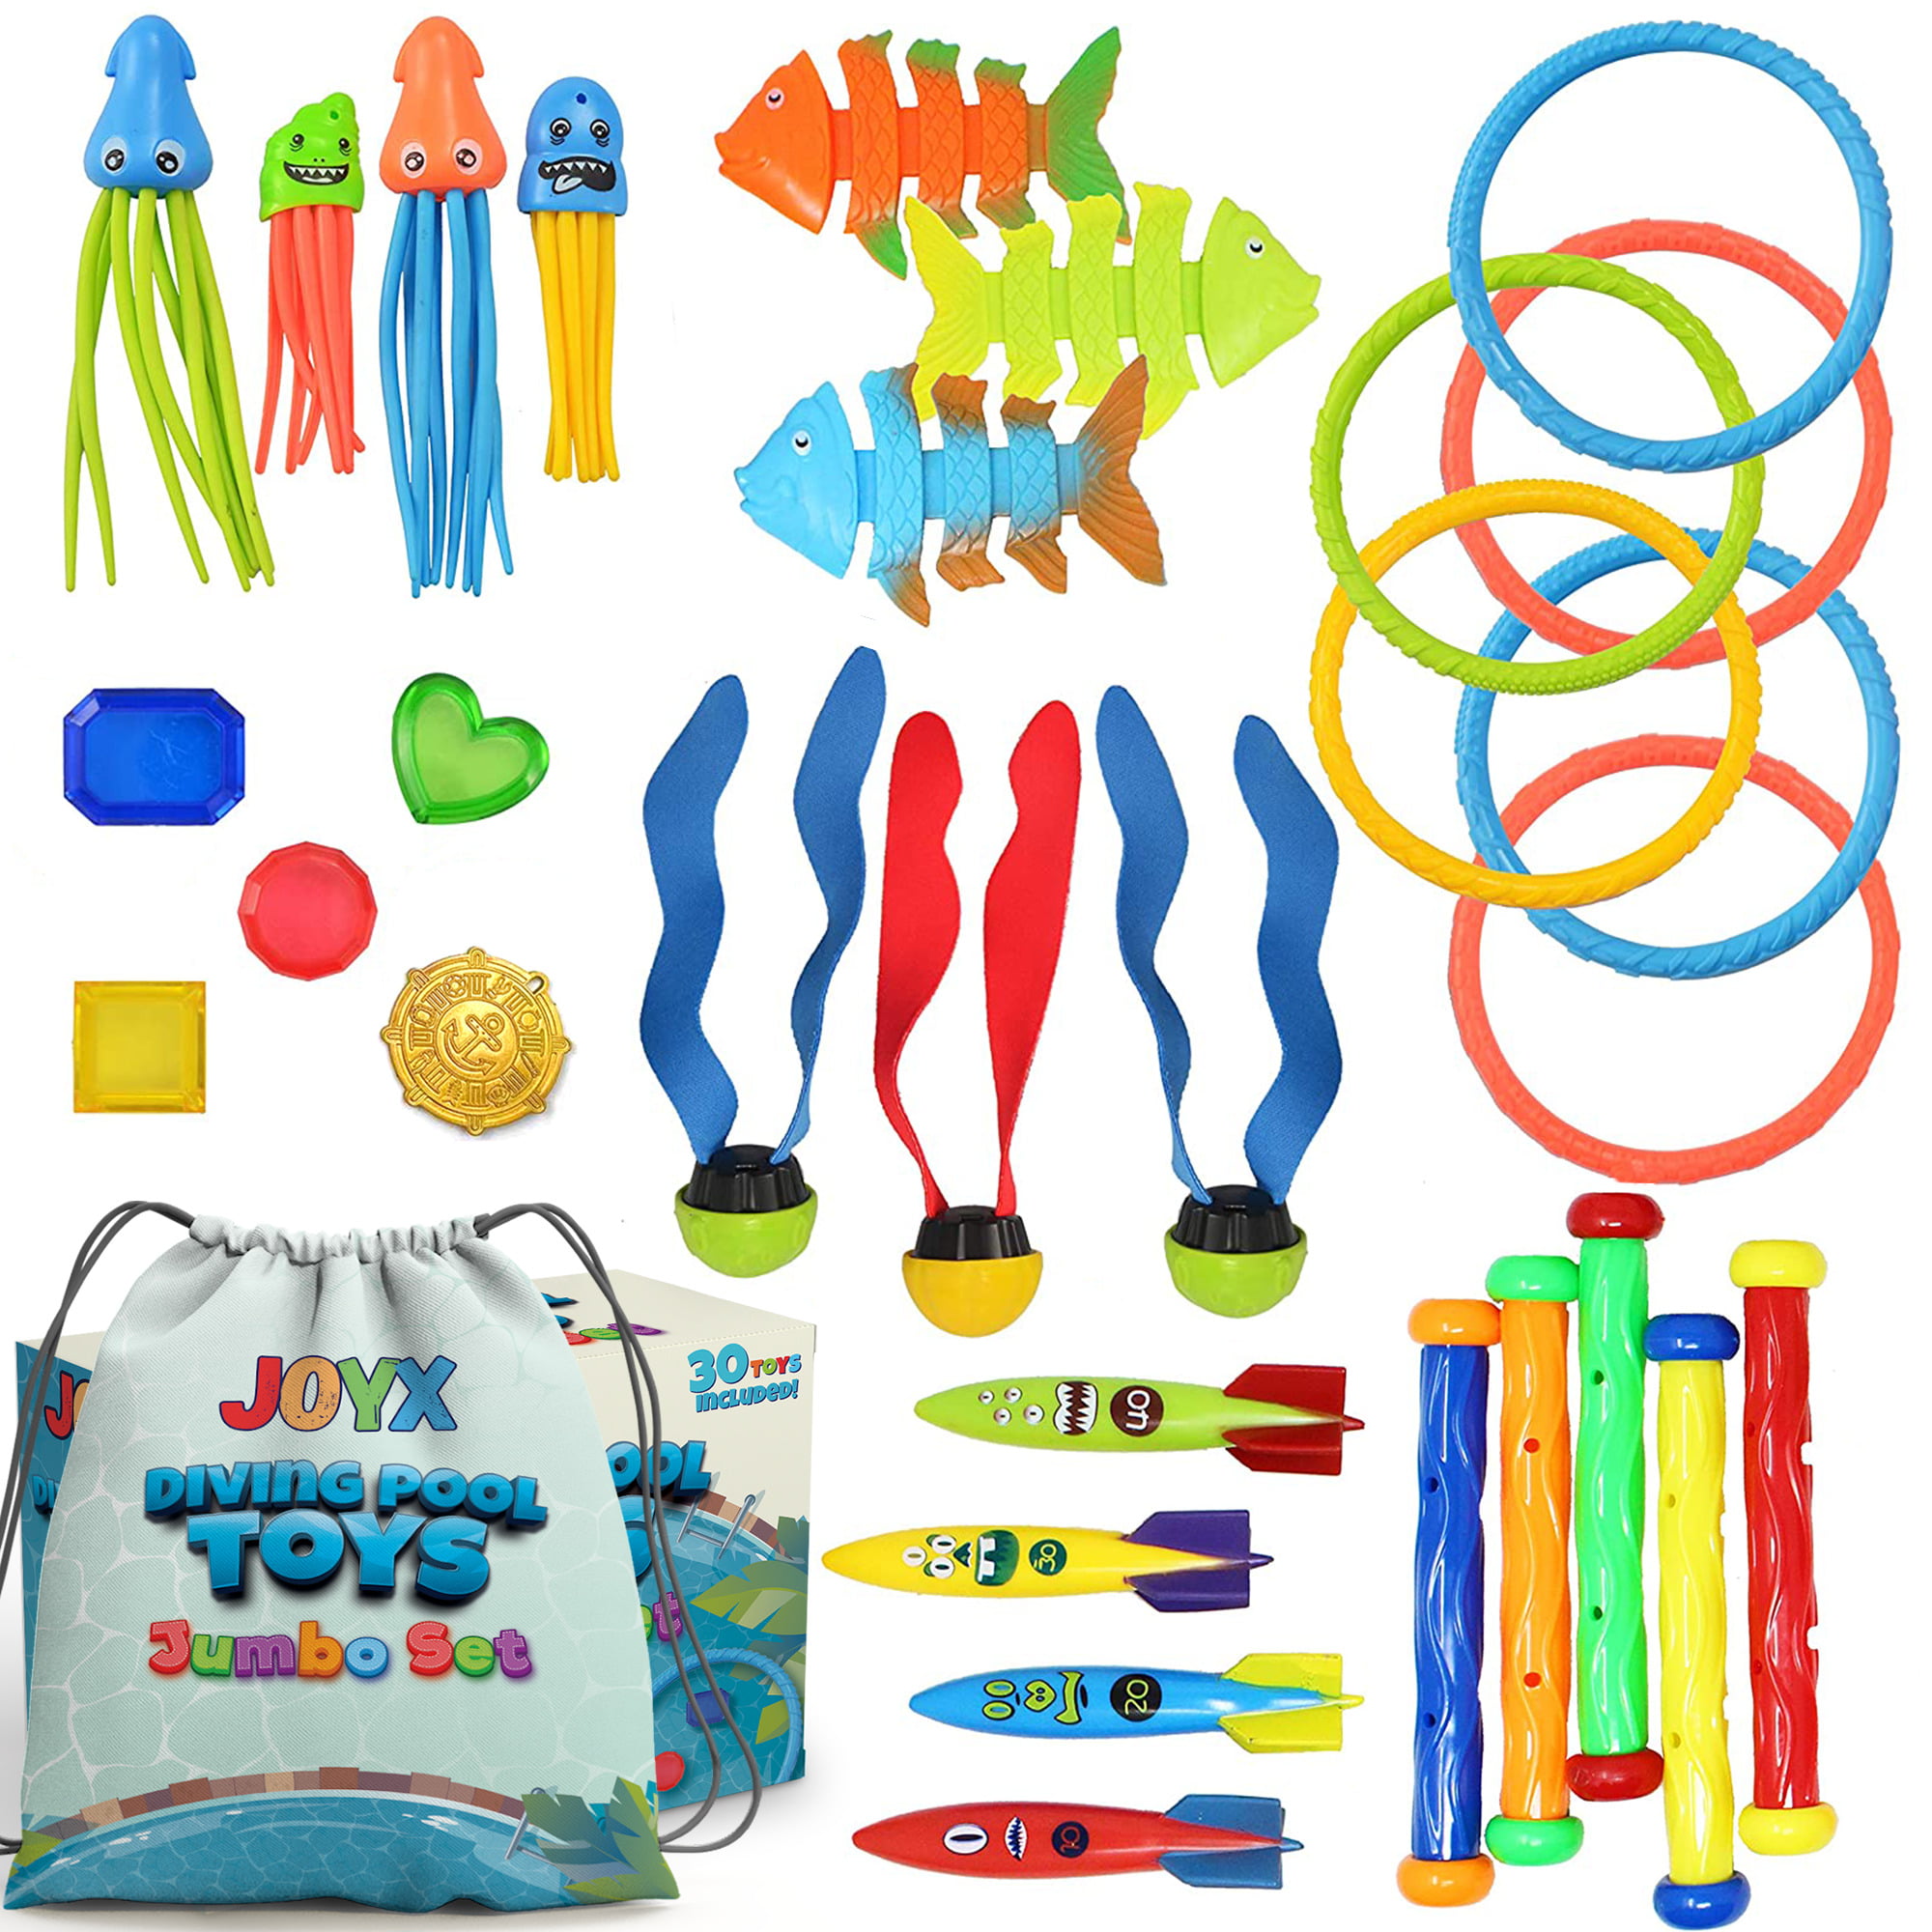 2 Sets of 8 Dizzy Dive Sticks Play Day Swimming Pool Toys 6 for sale online Two 